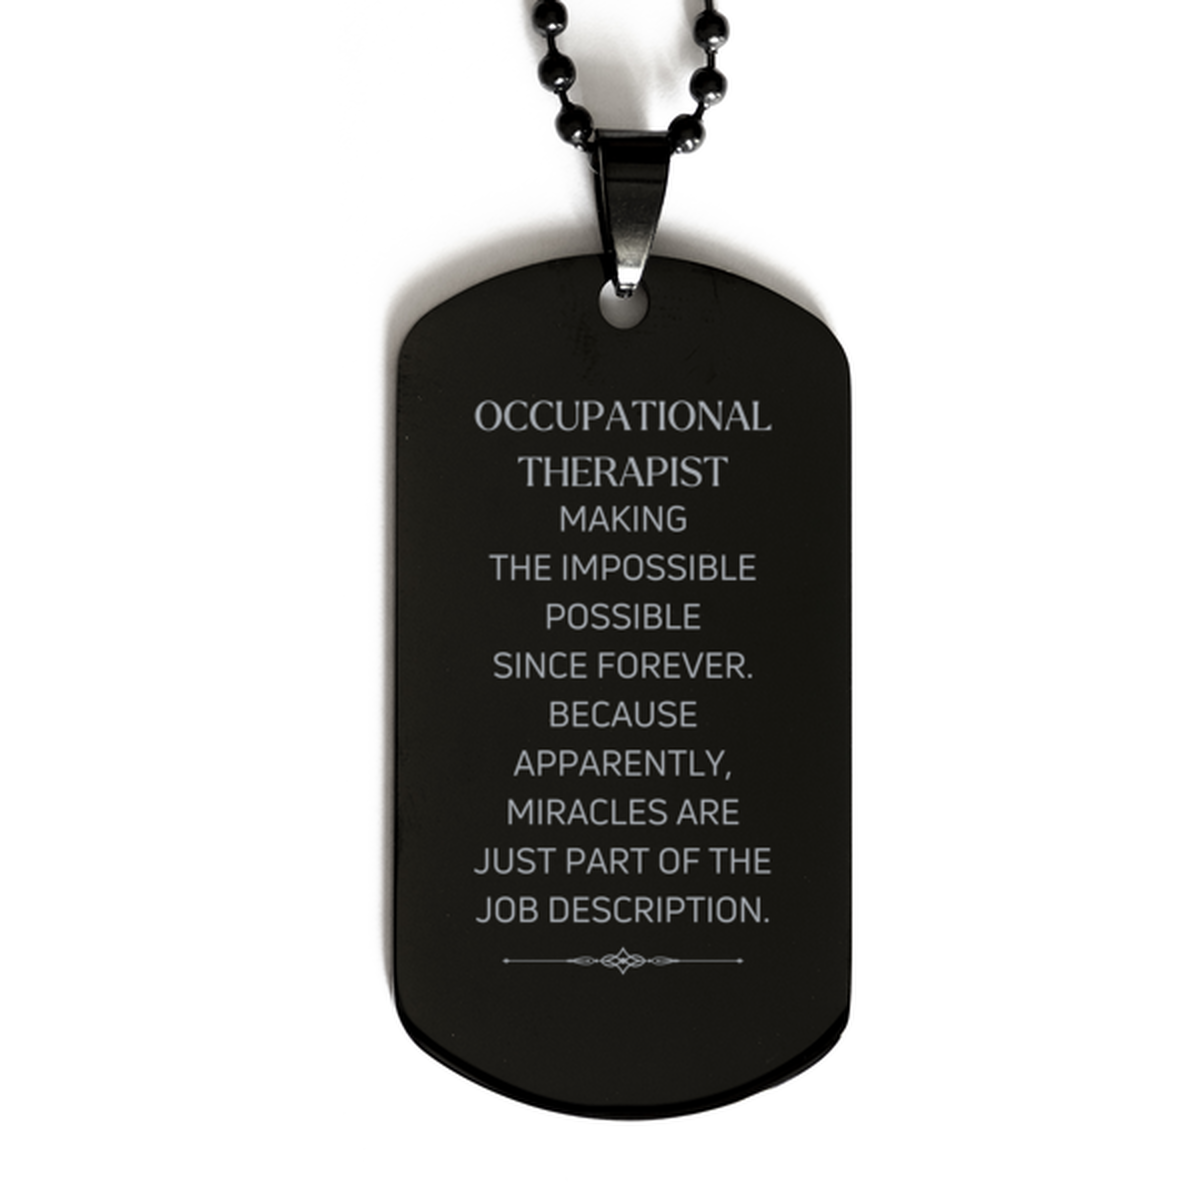 Funny Occupational Therapist Gifts, Miracles are just part of the job description, Inspirational Birthday Black Dog Tag For Occupational Therapist, Men, Women, Coworkers, Friends, Boss